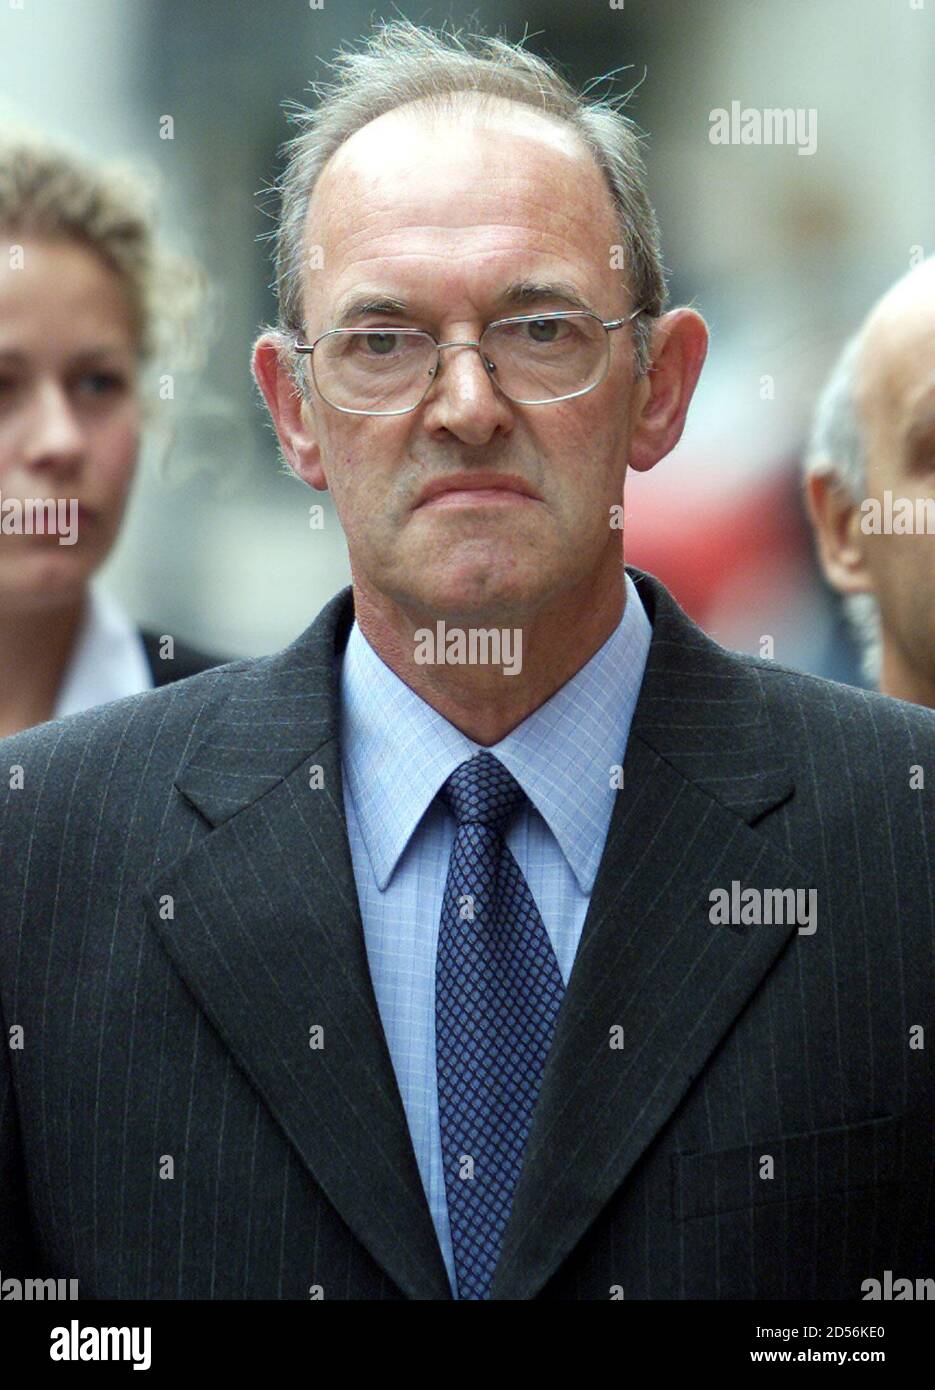 Former South Yorkshire Police Superintendent Bernard Murray arrives at Leeds Crown Court June 12. Murray and former Chief Superintendant David Duckinfield are charged with manslaughter and wilful neglect of duty in the first criminal proceedings to follow the Hillsborough tragedy in which 96 Liverpool soccer fans were crushed to death at the 1989 FA Cup Semi final.  DC/PS Stock Photo